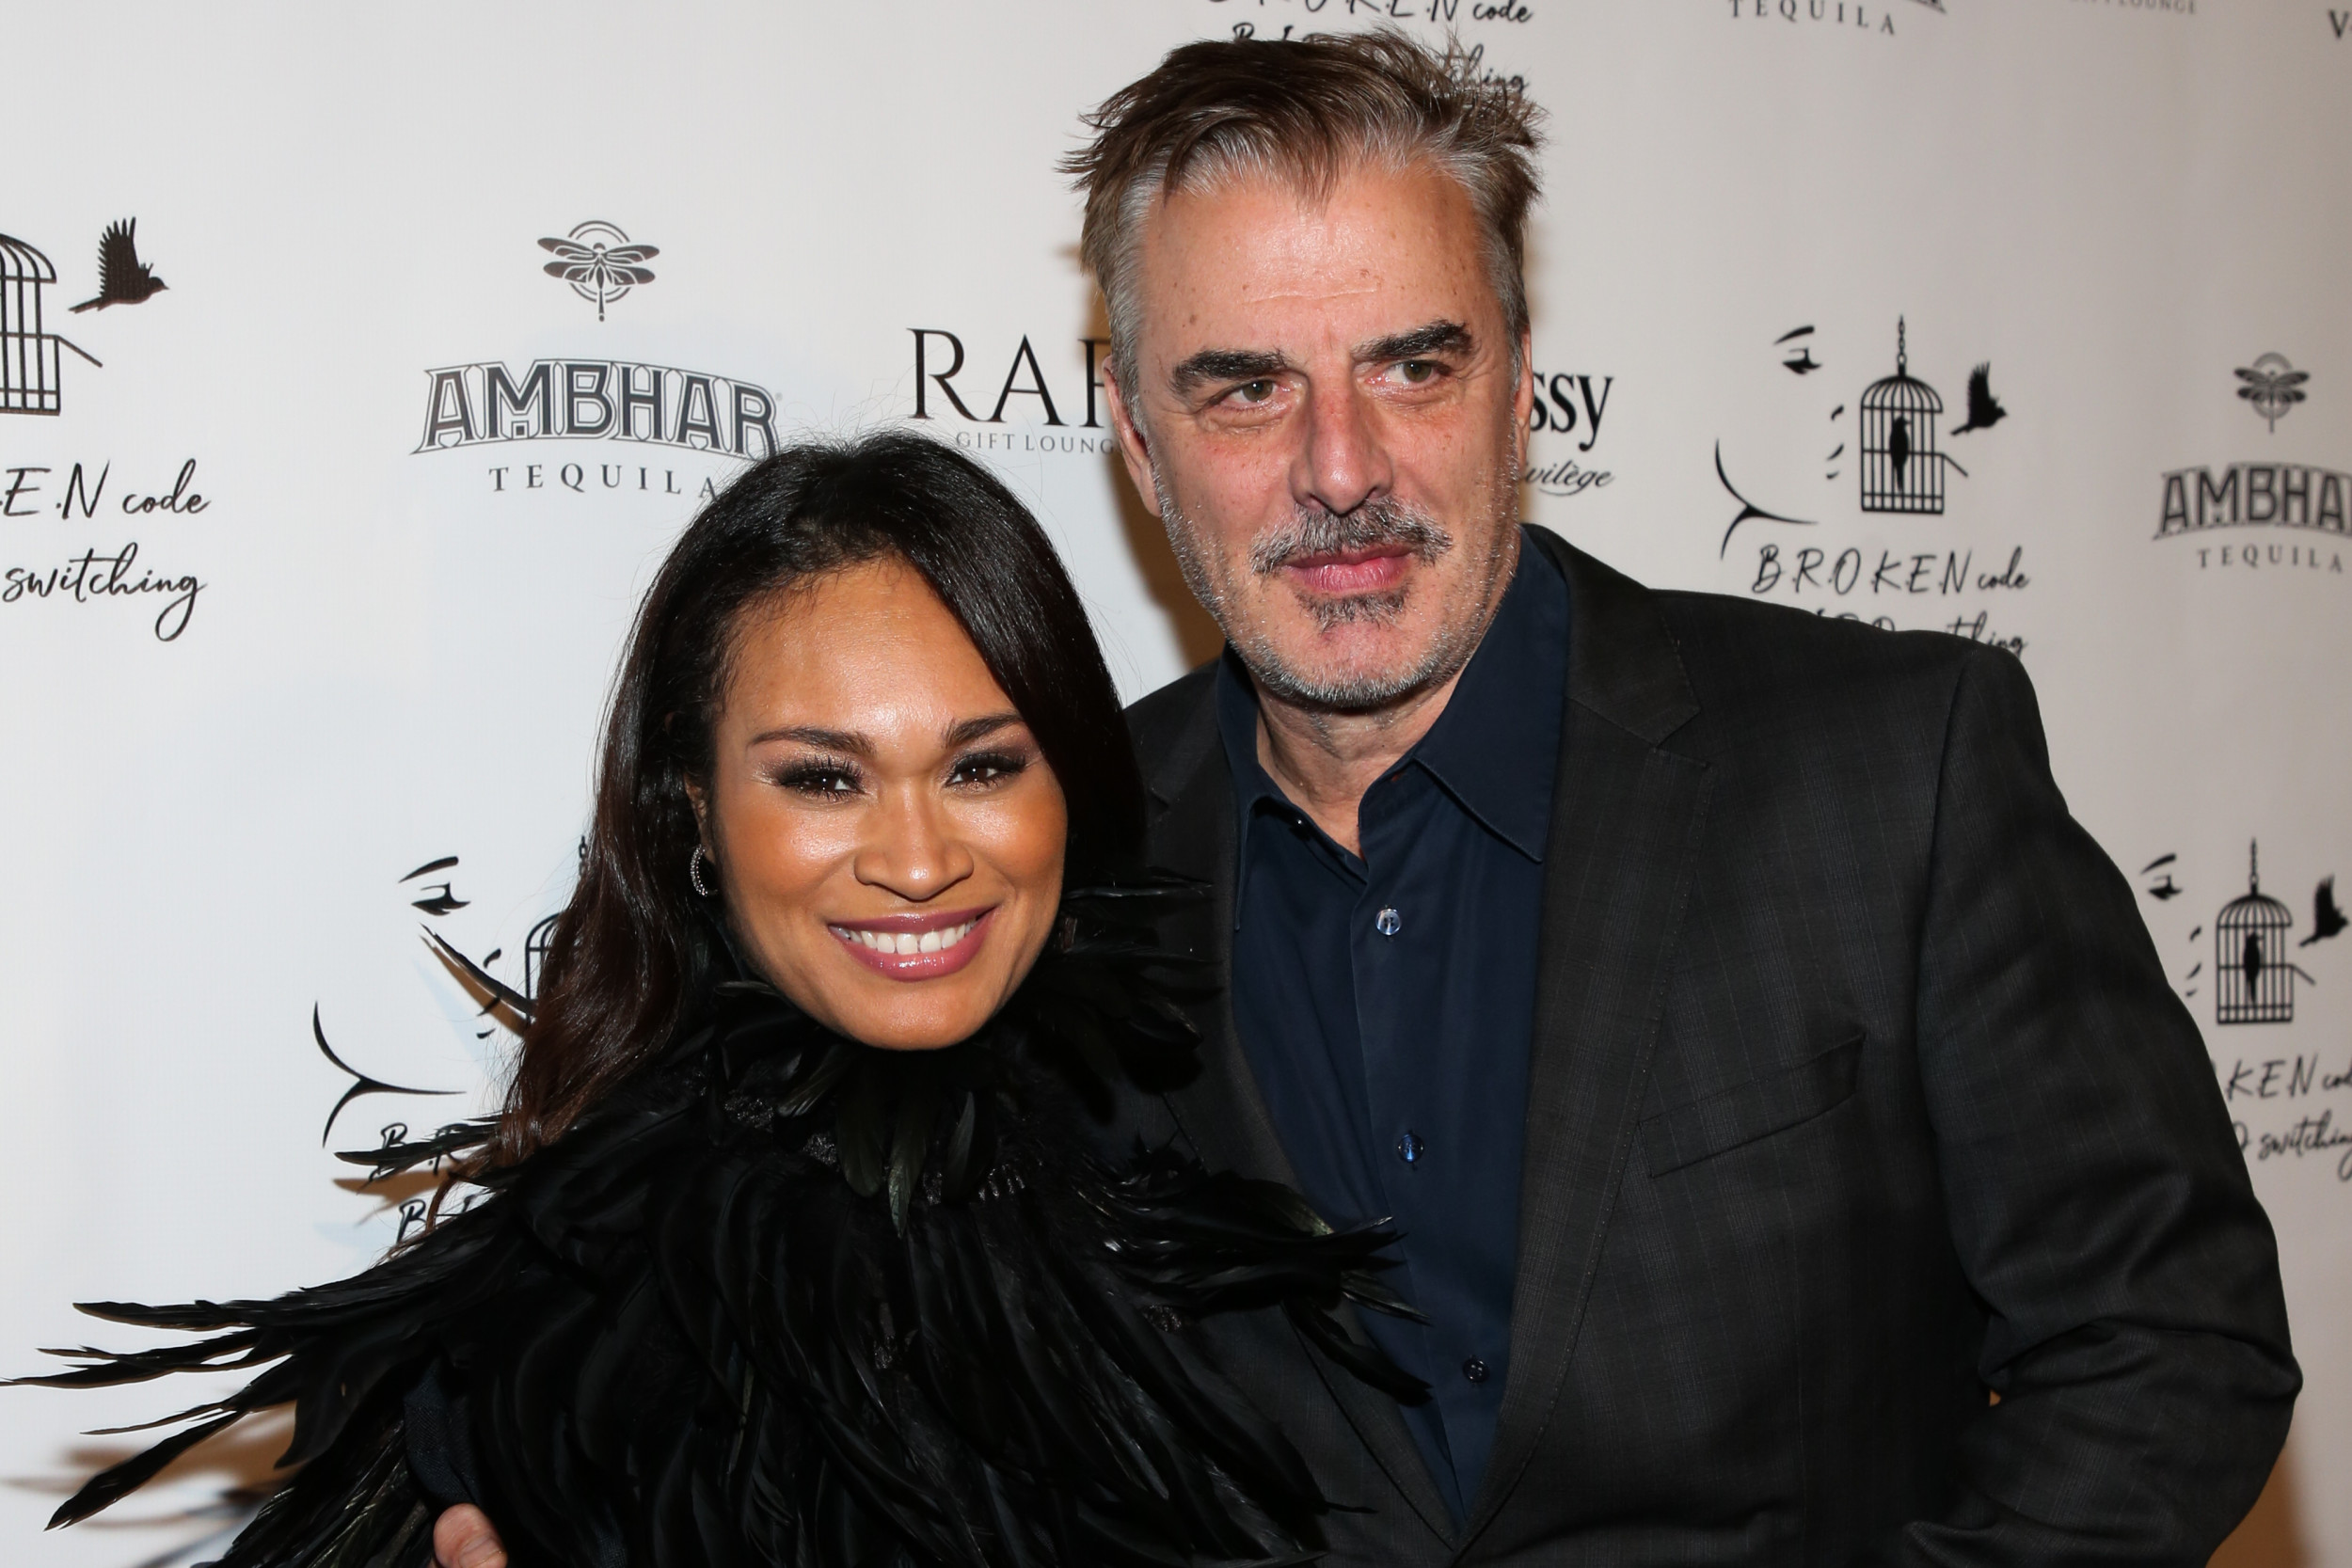 Chris Noth dating history as 'Sex and the City' star accused of s...